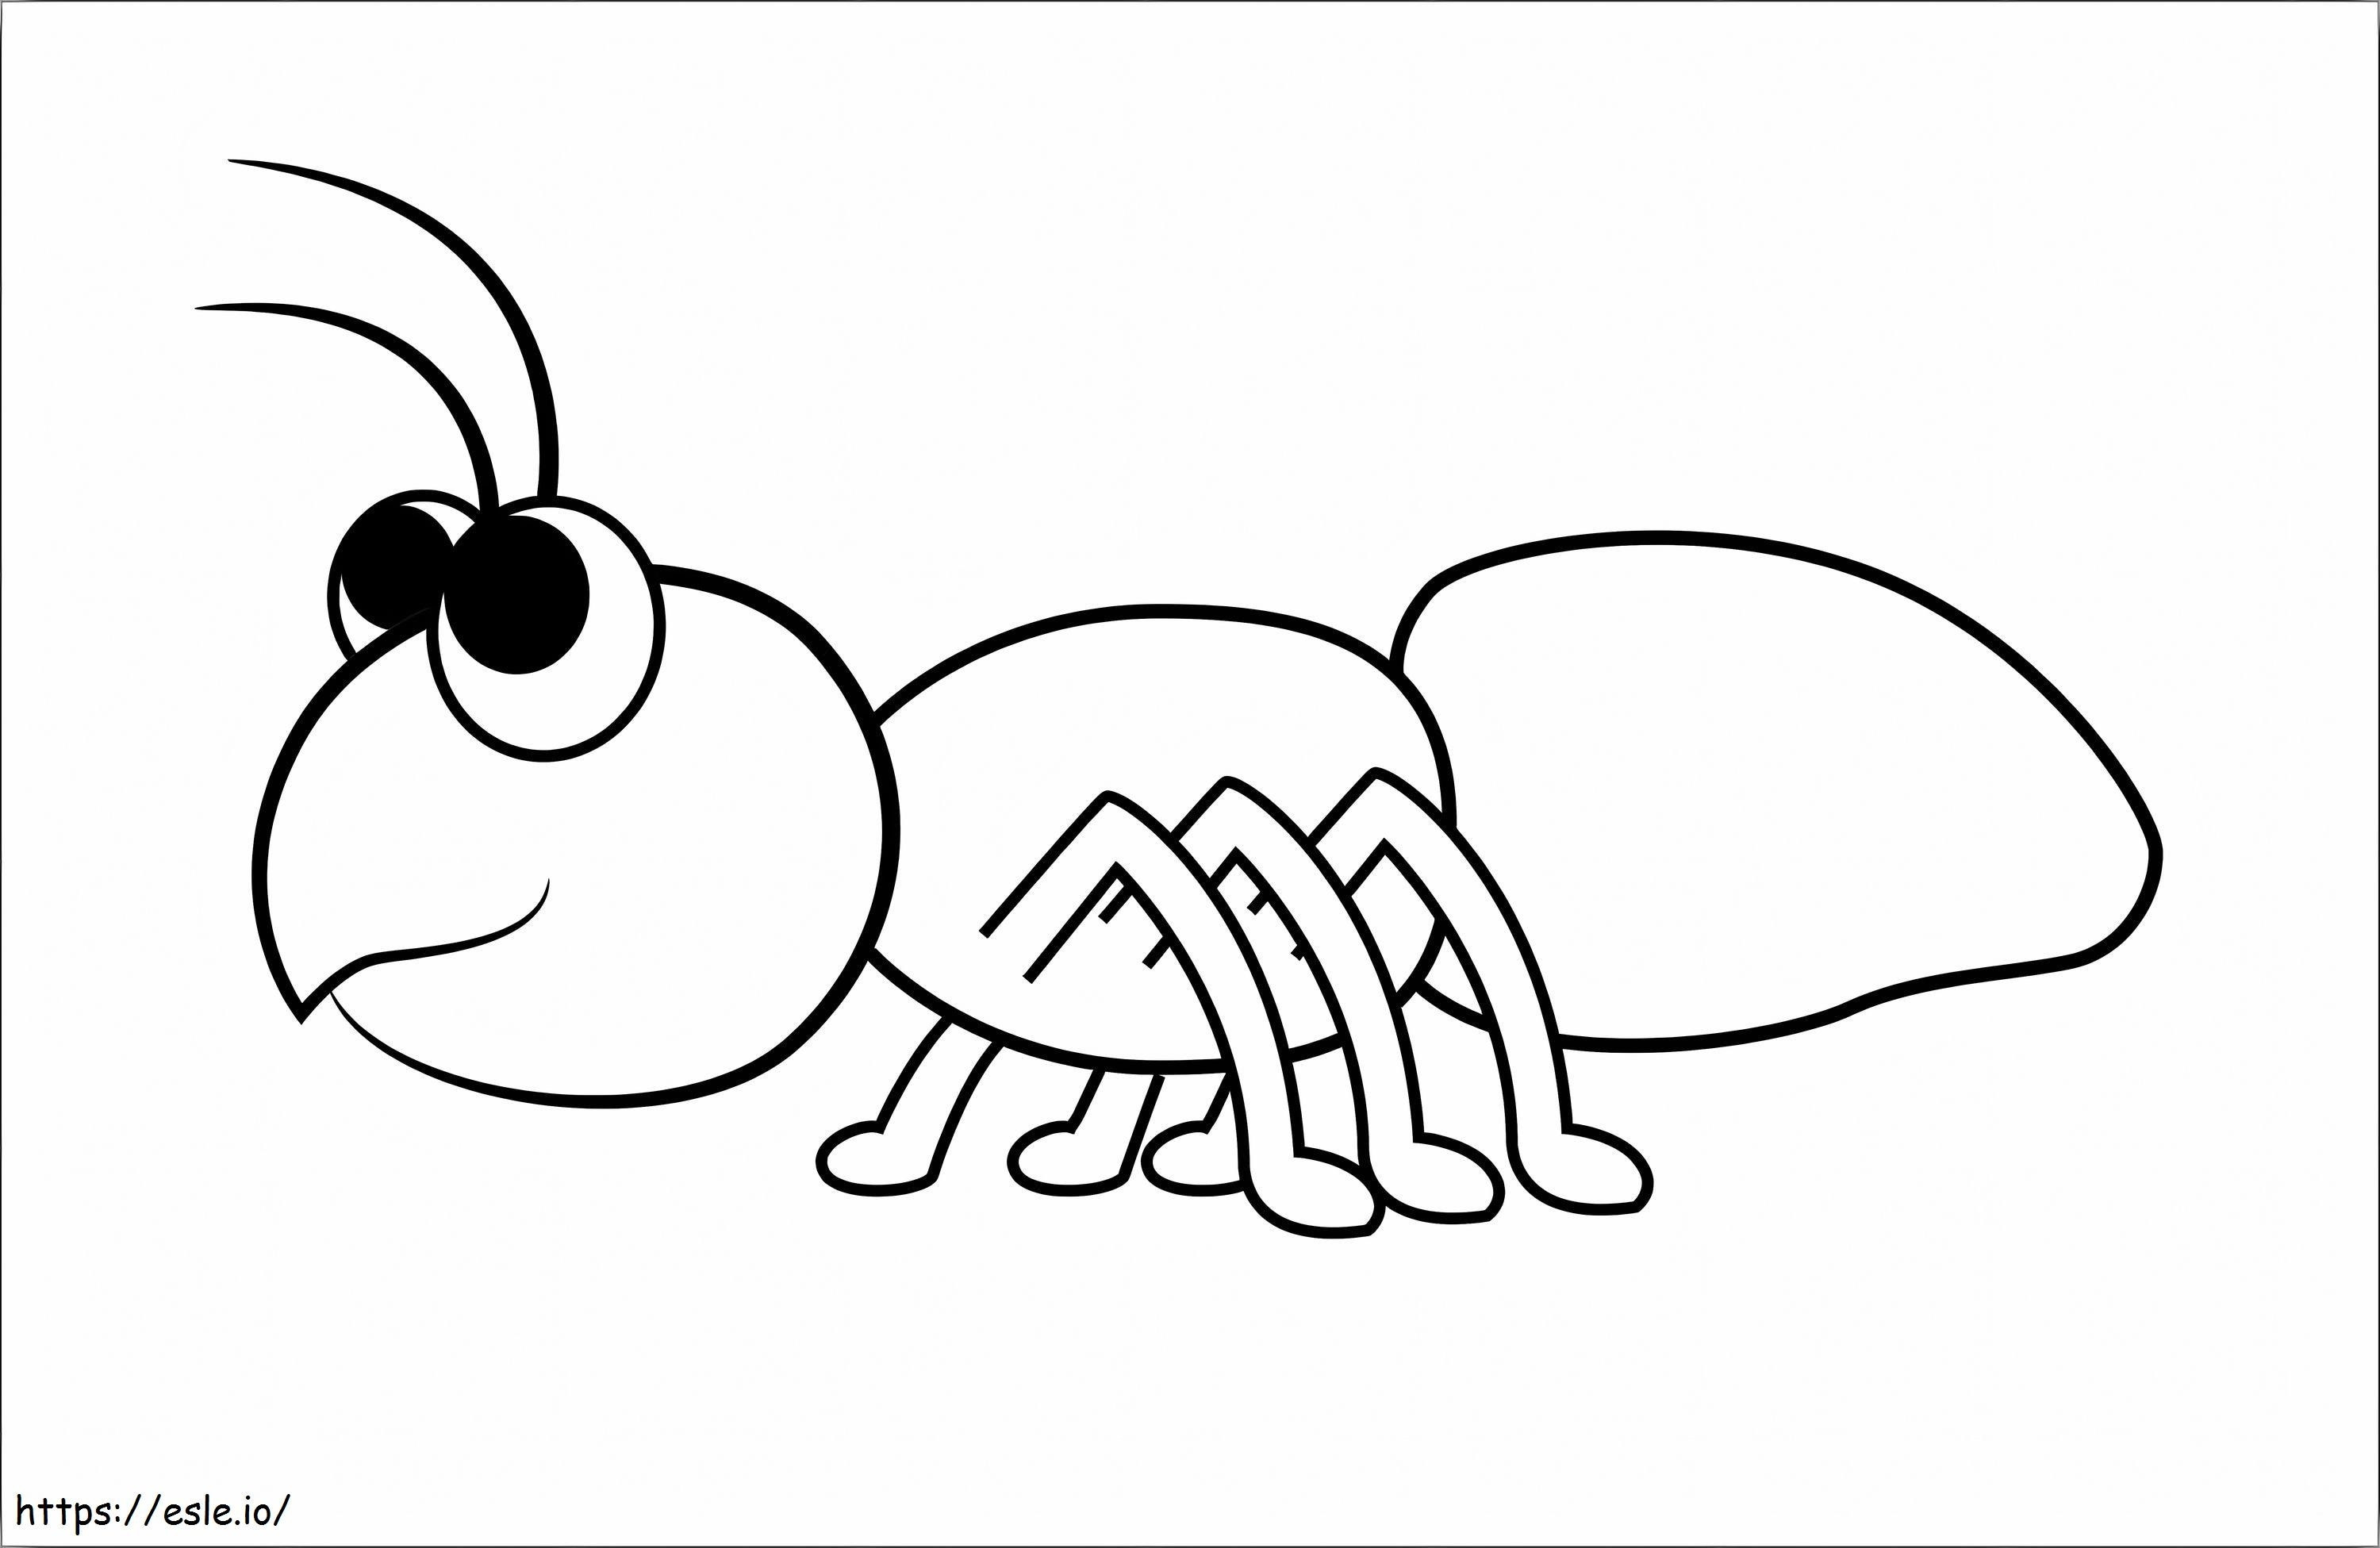 Awesome Ant coloring page